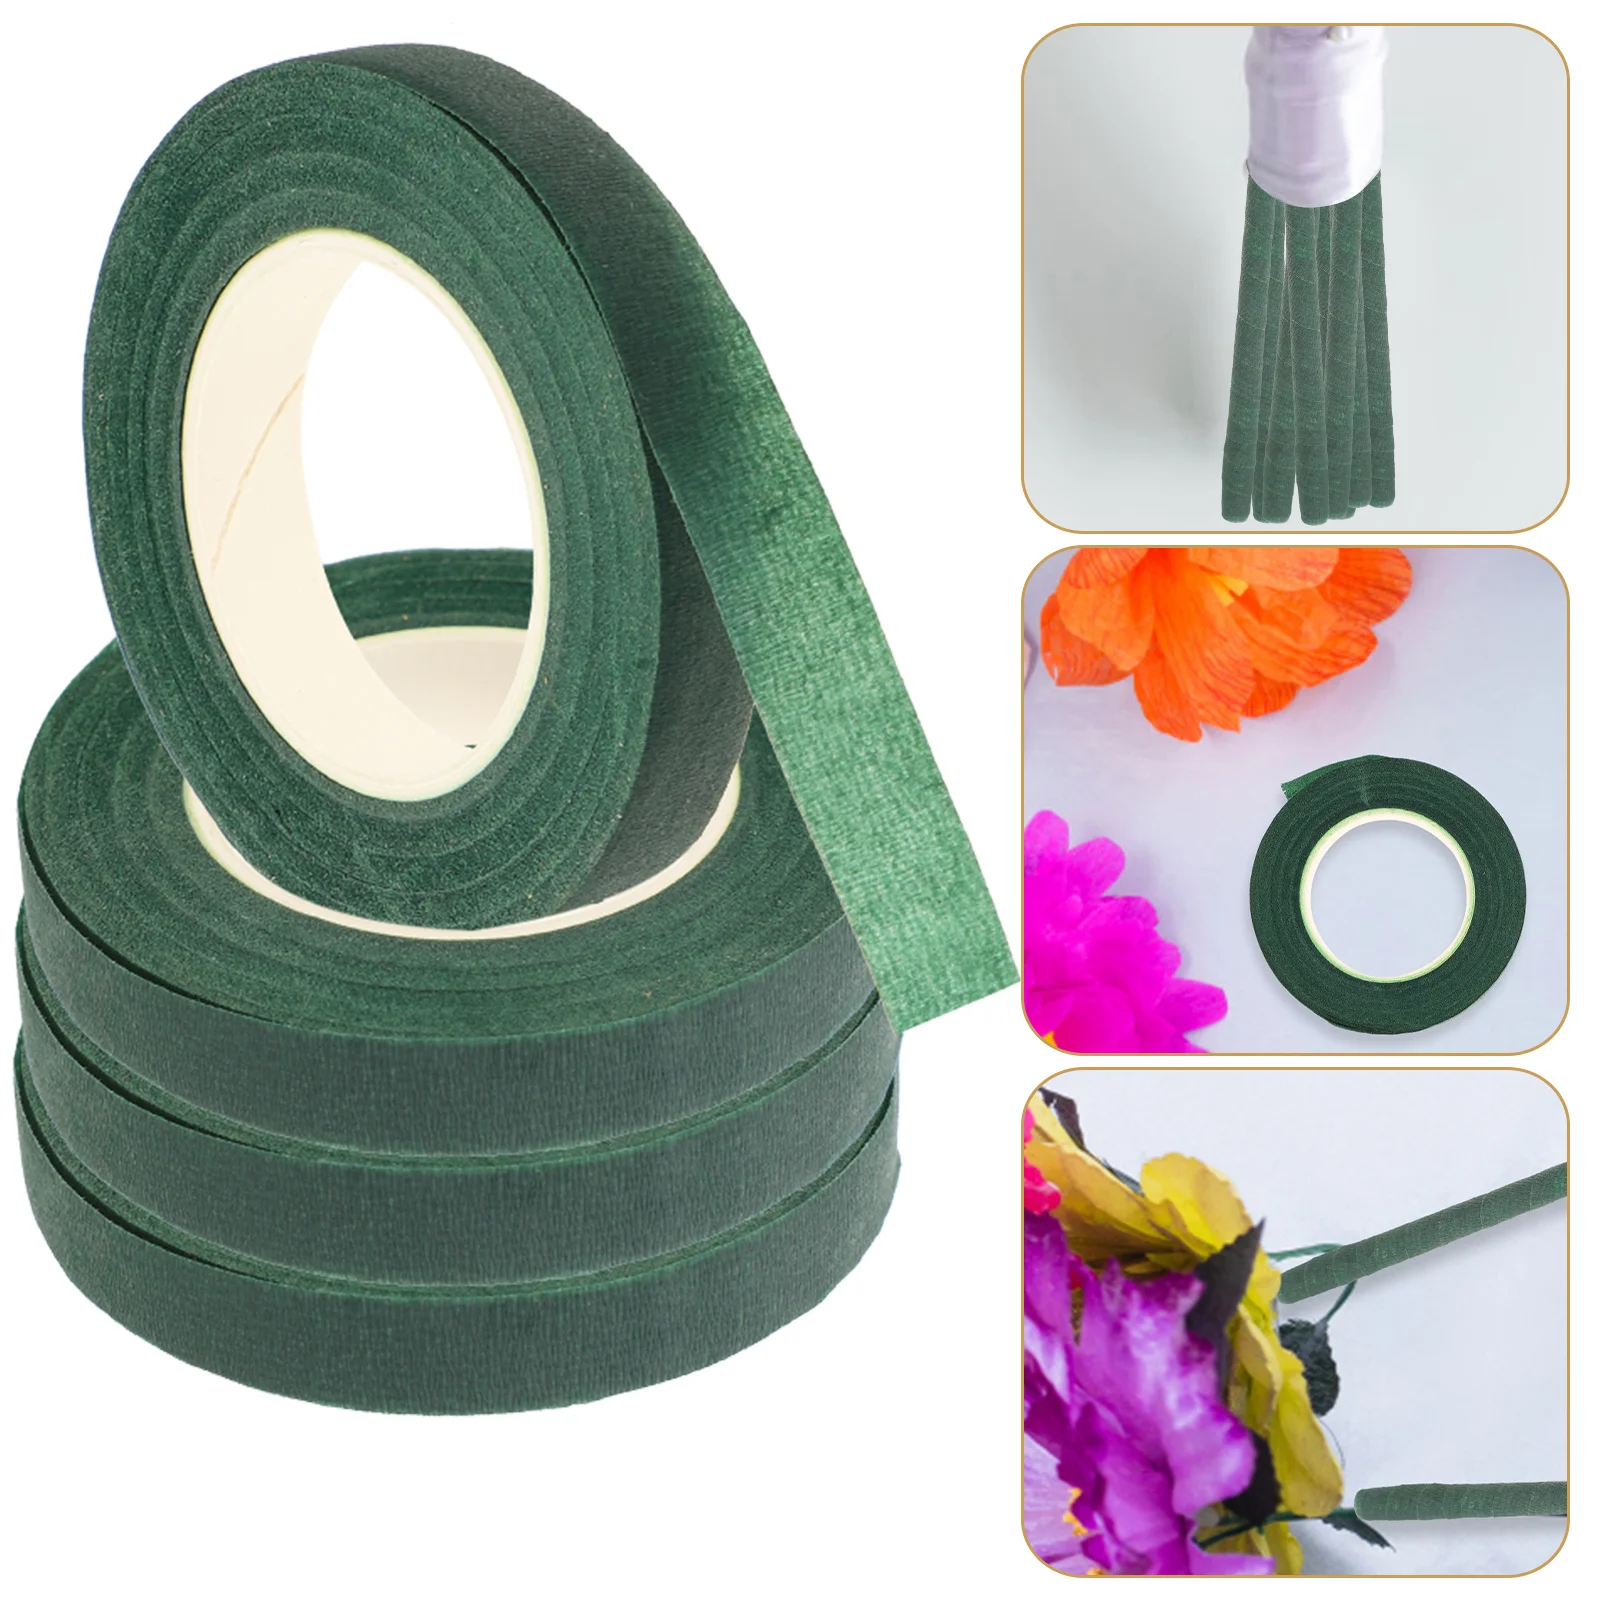 

Tape Floral Flower Stem Green Tapes Arrangement Gift Bouquet Florist Washi Wrapping Diy Supplies Craft Wrap Masking Paper